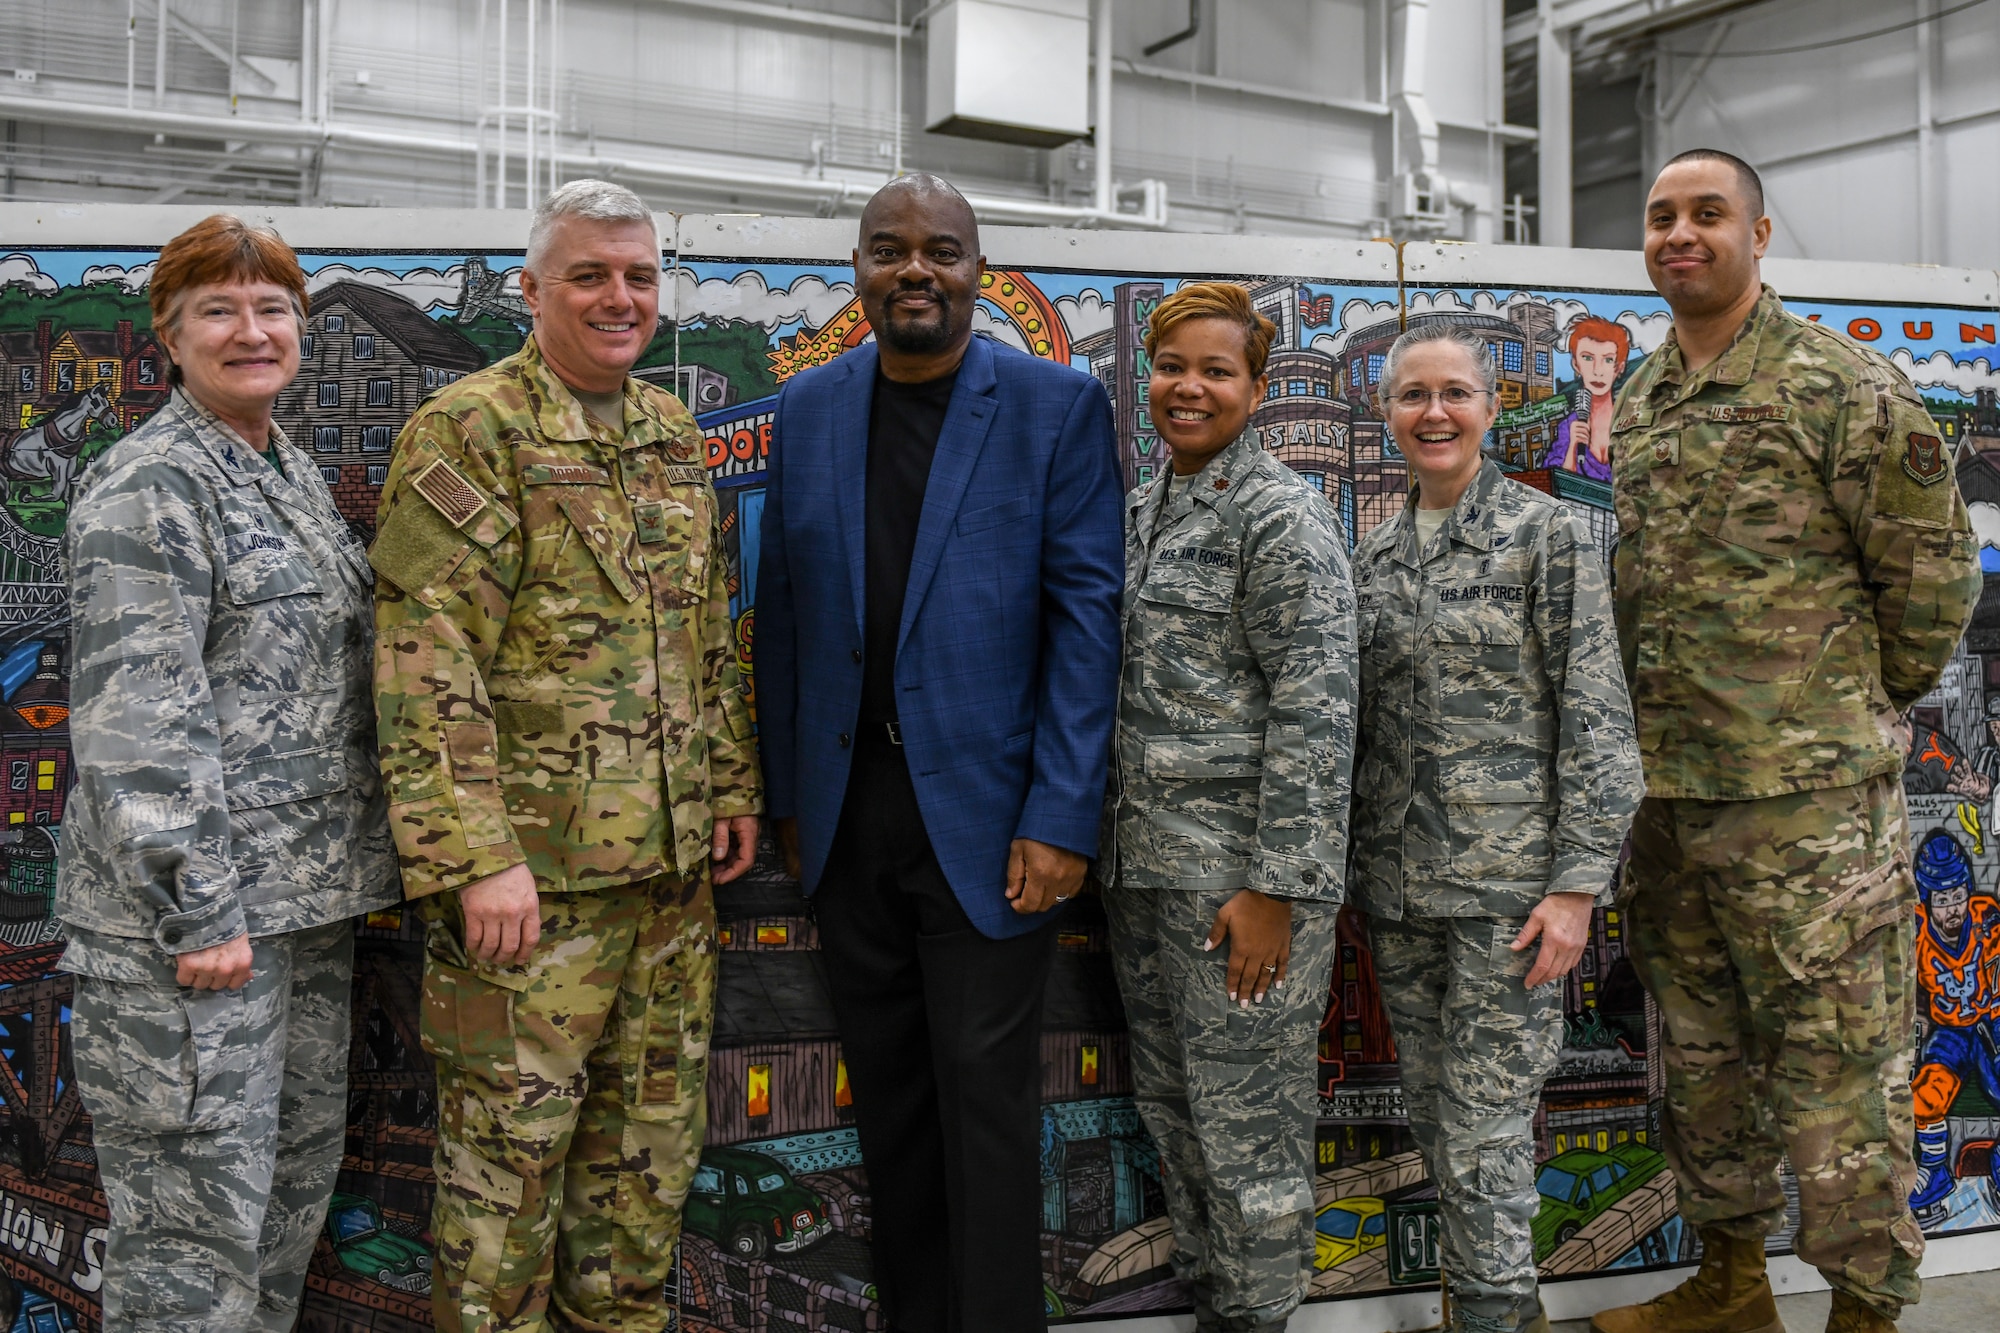 A Career and Diversity Day at Youngstown Air Reserve Station, Jan. 11, 2020, was designed to bring together the unique differences of Airmen to form a valued organization where Airmen know they can prosper and continue to serve with pride.